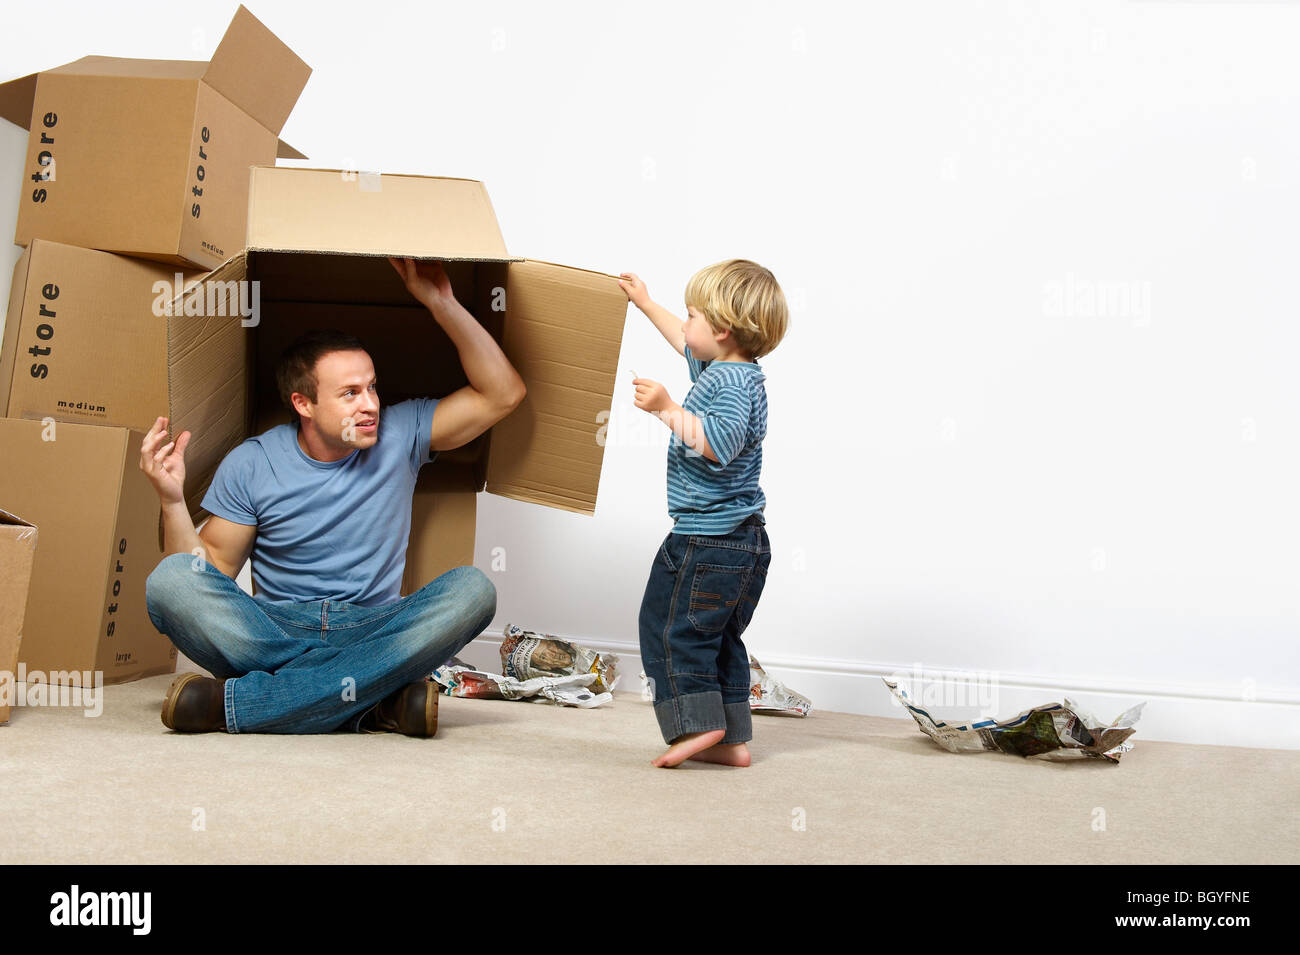 Father and son playing with moving boxes Stock Photo